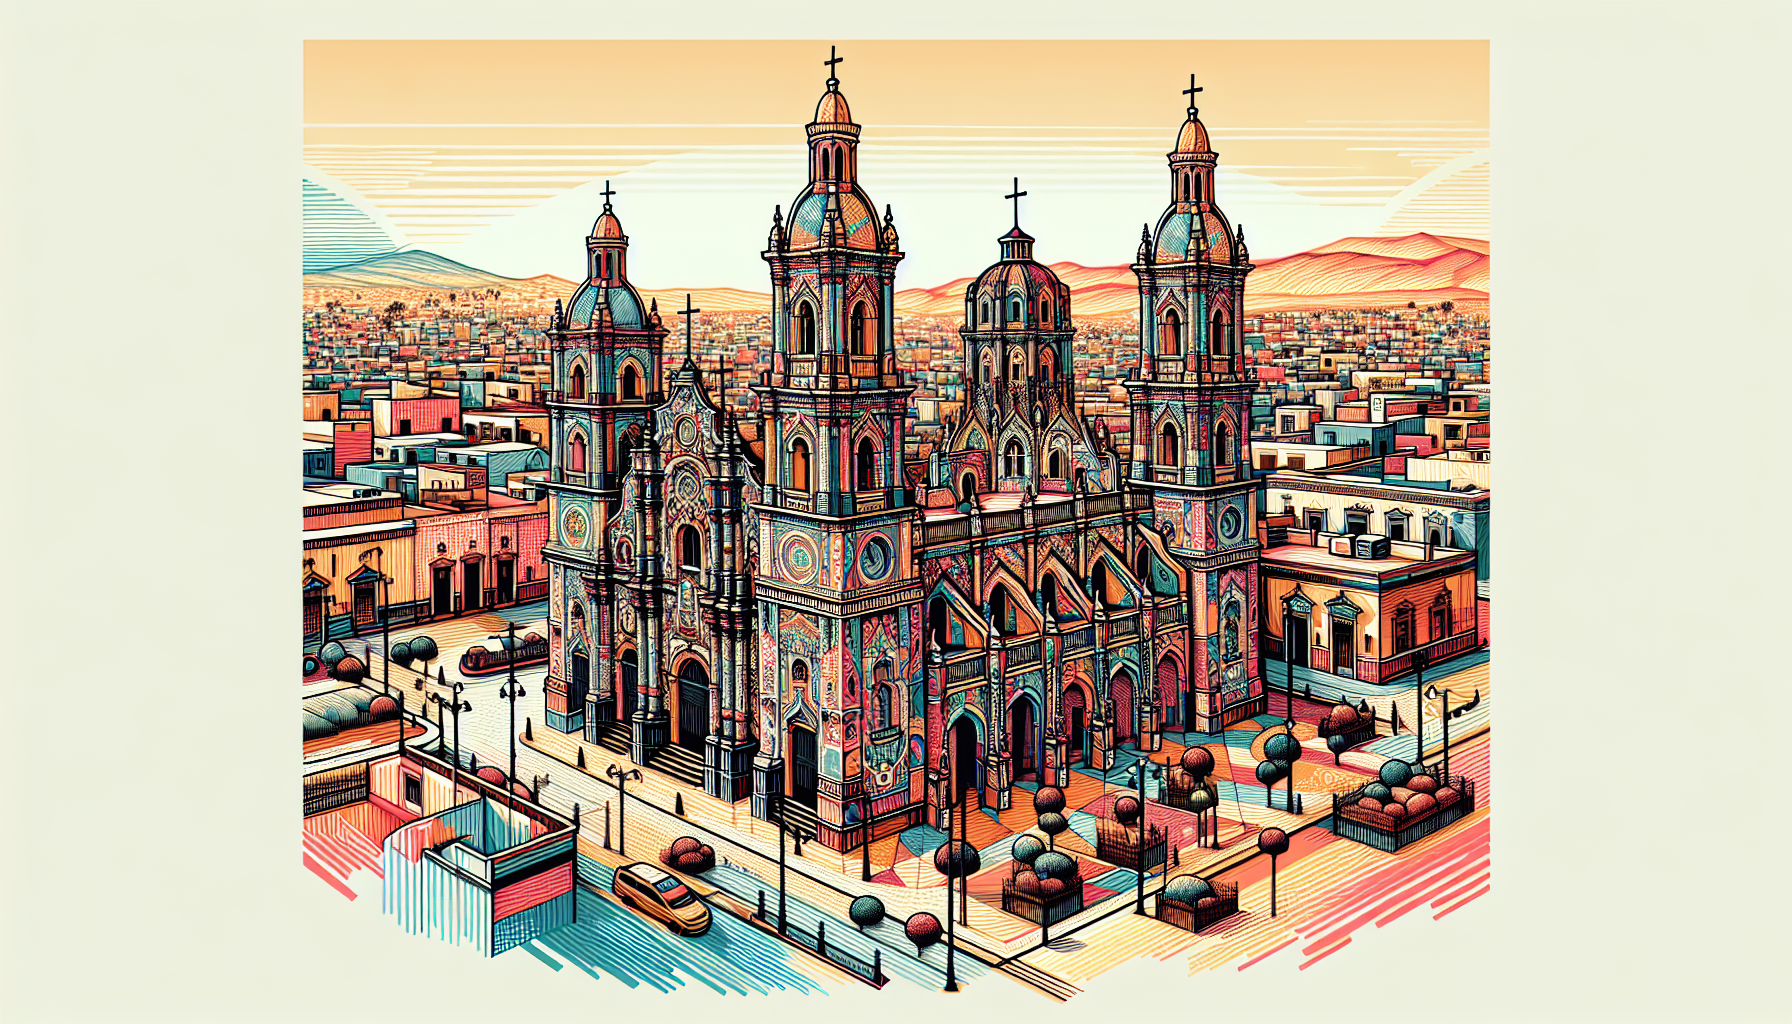 Create an image of a stunning and elaborate church in Hermosillo, Mexico, showcasing its intricate architectural details and vibrant colors that capture the beauty and history of the city.